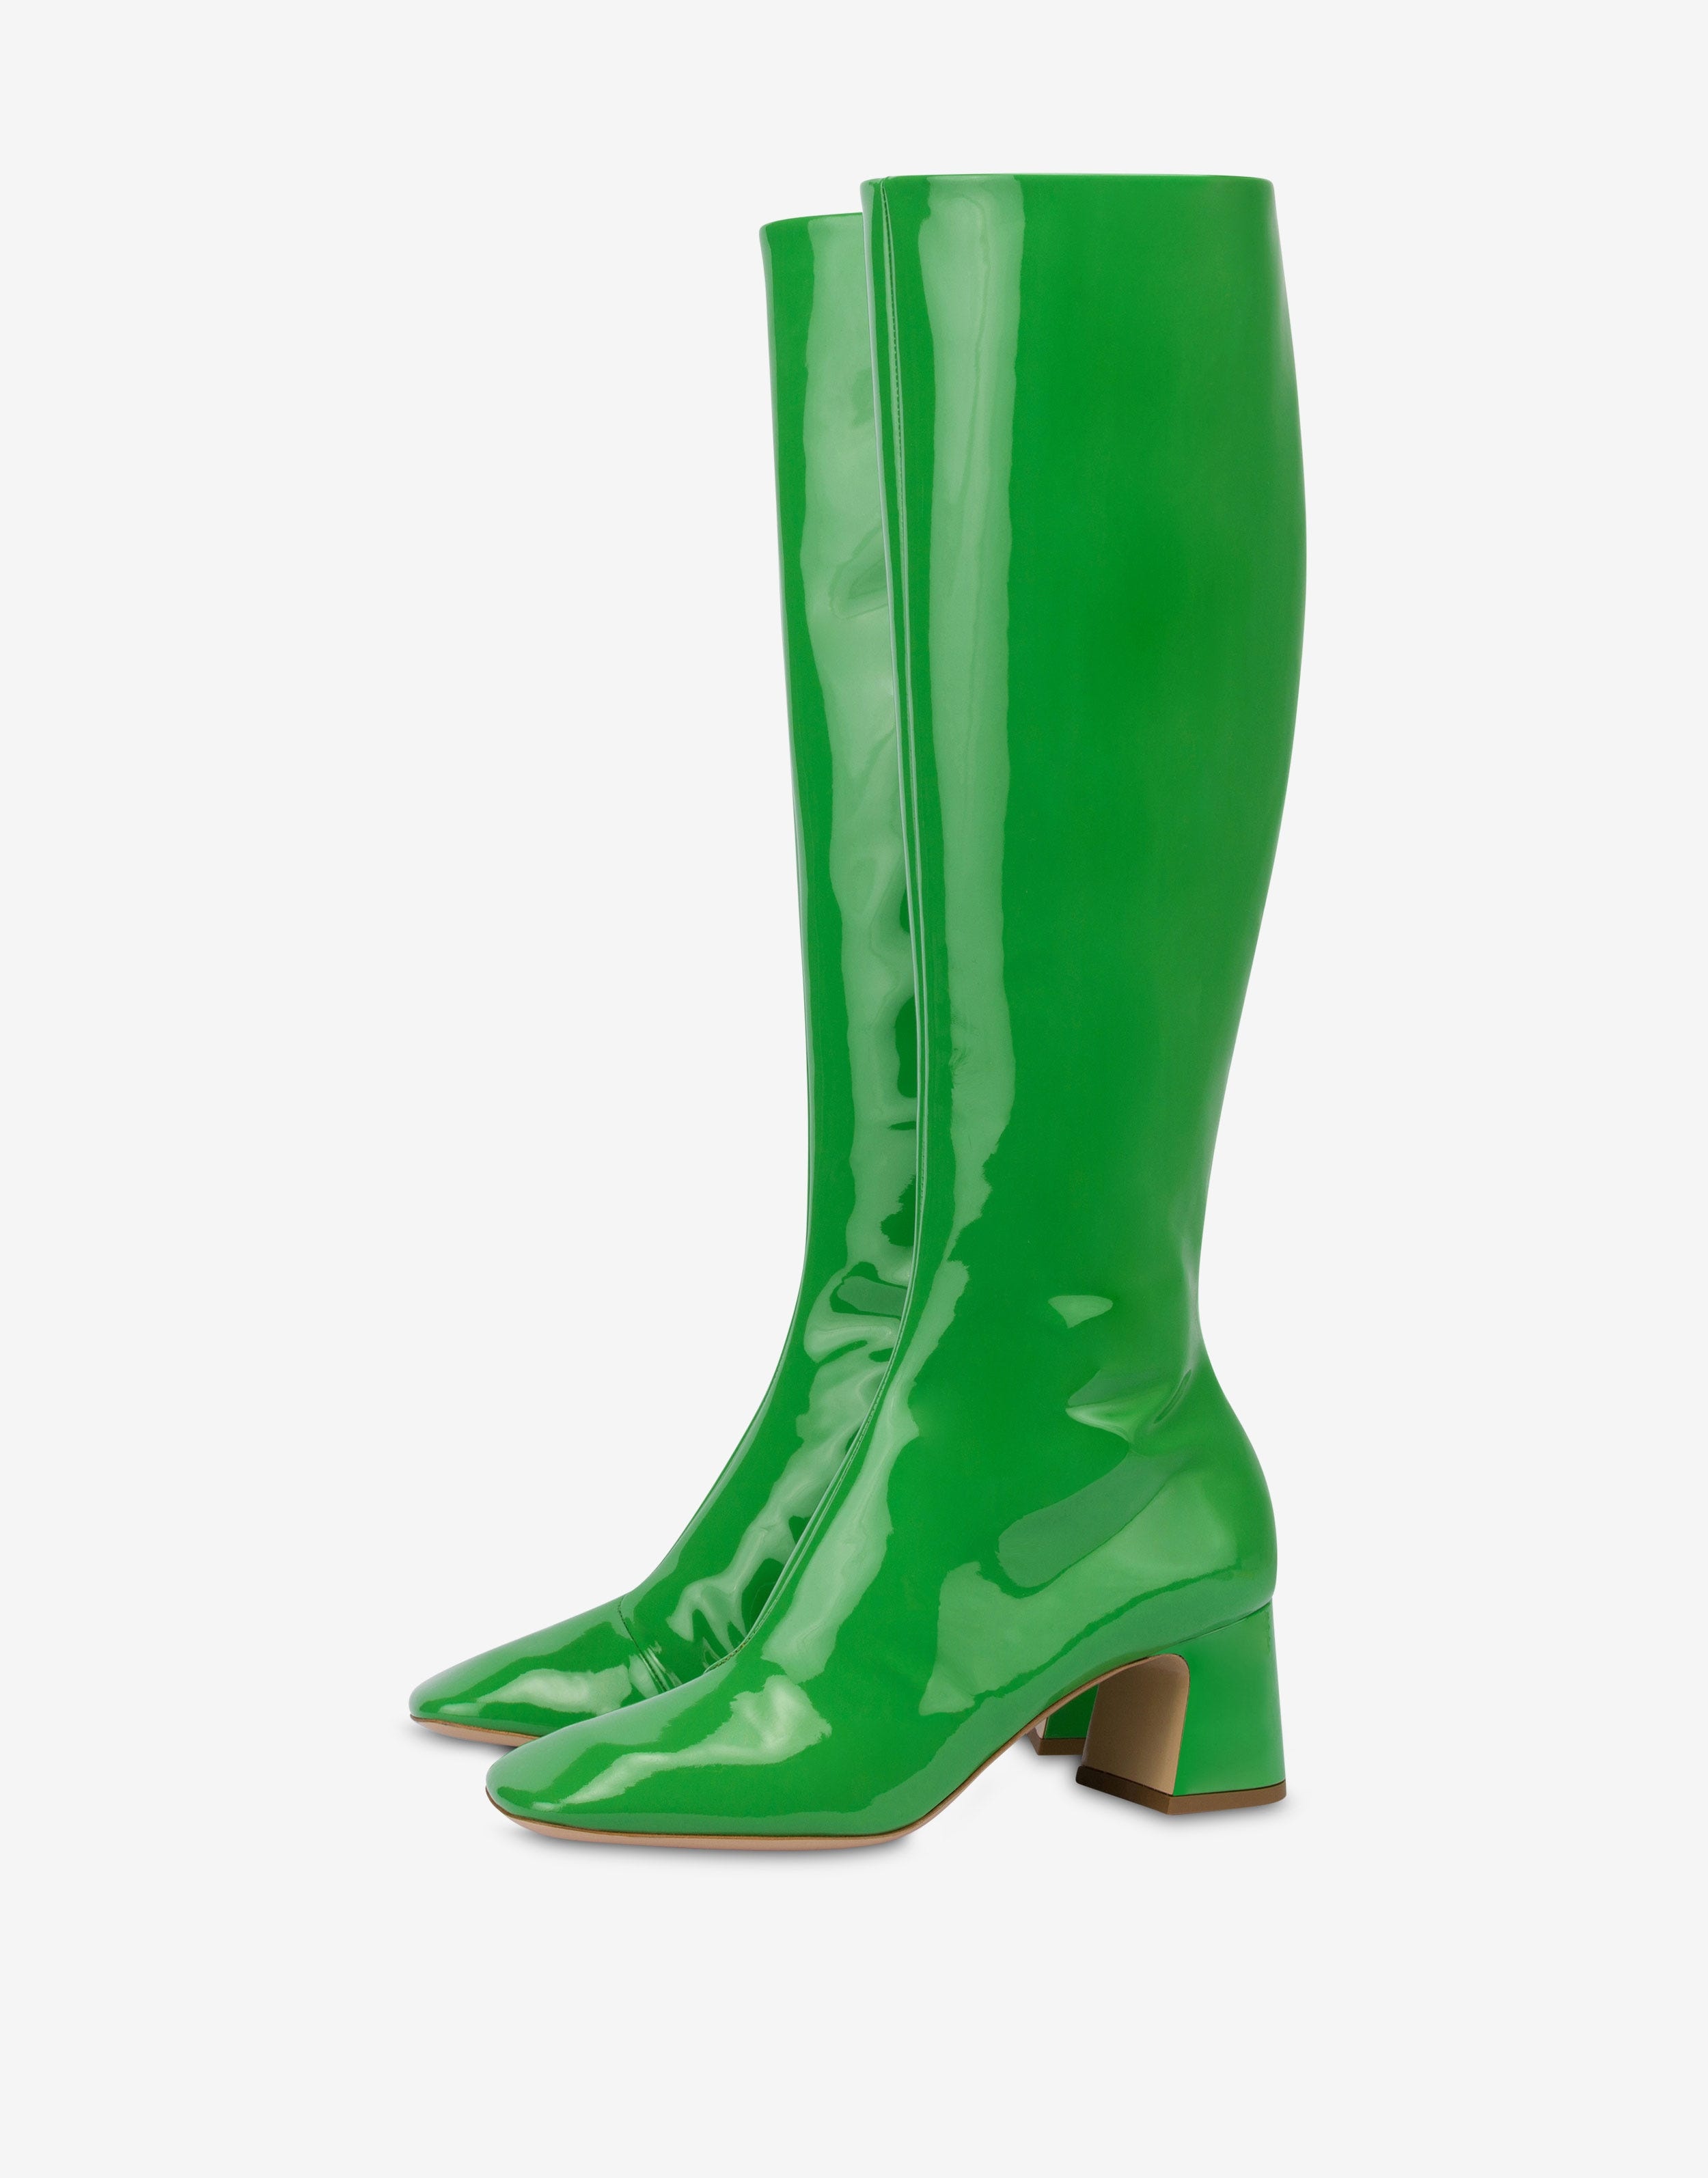 PATENT LEATHER BOOTS - 1